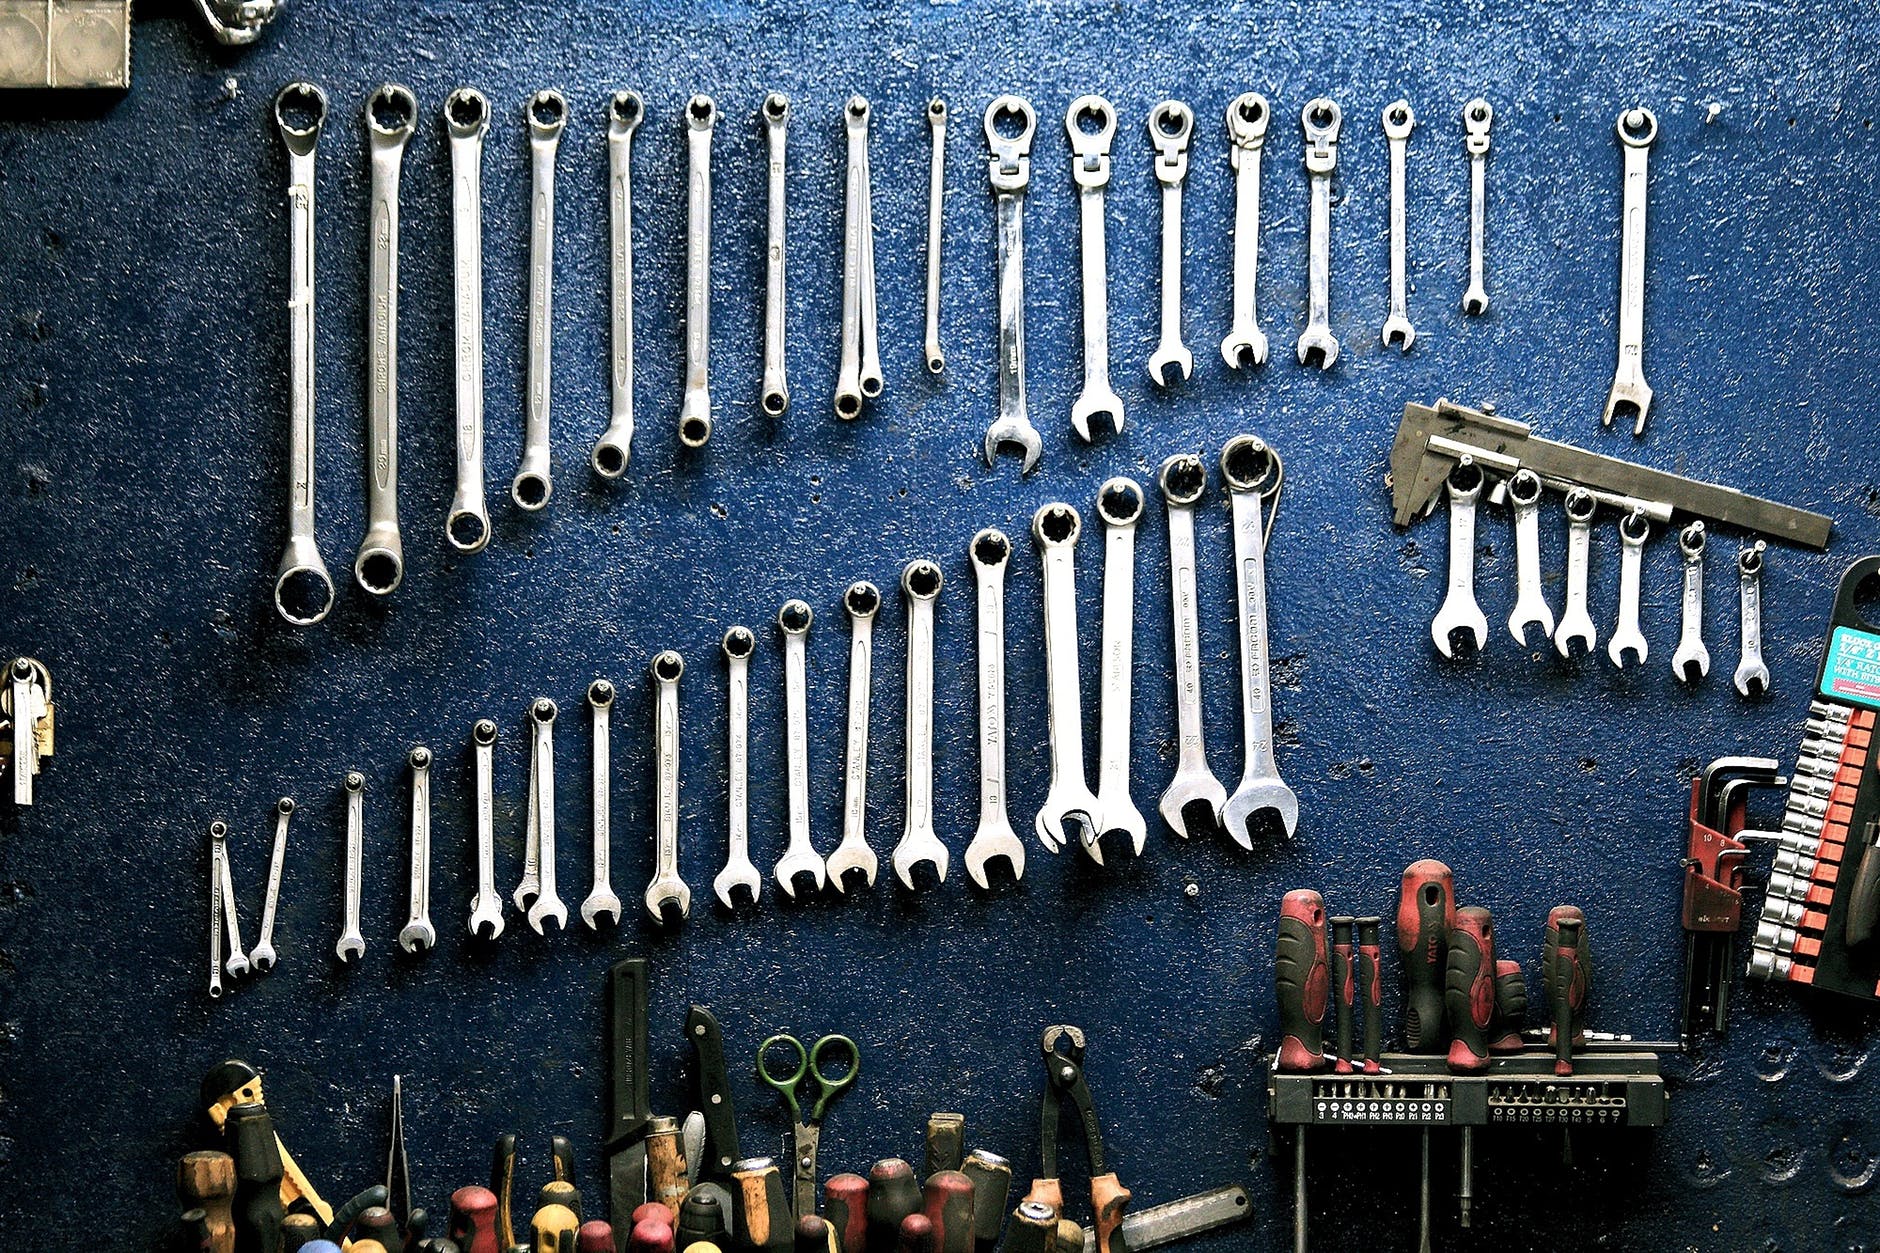 Tools lined up together on the inside of garage wall.